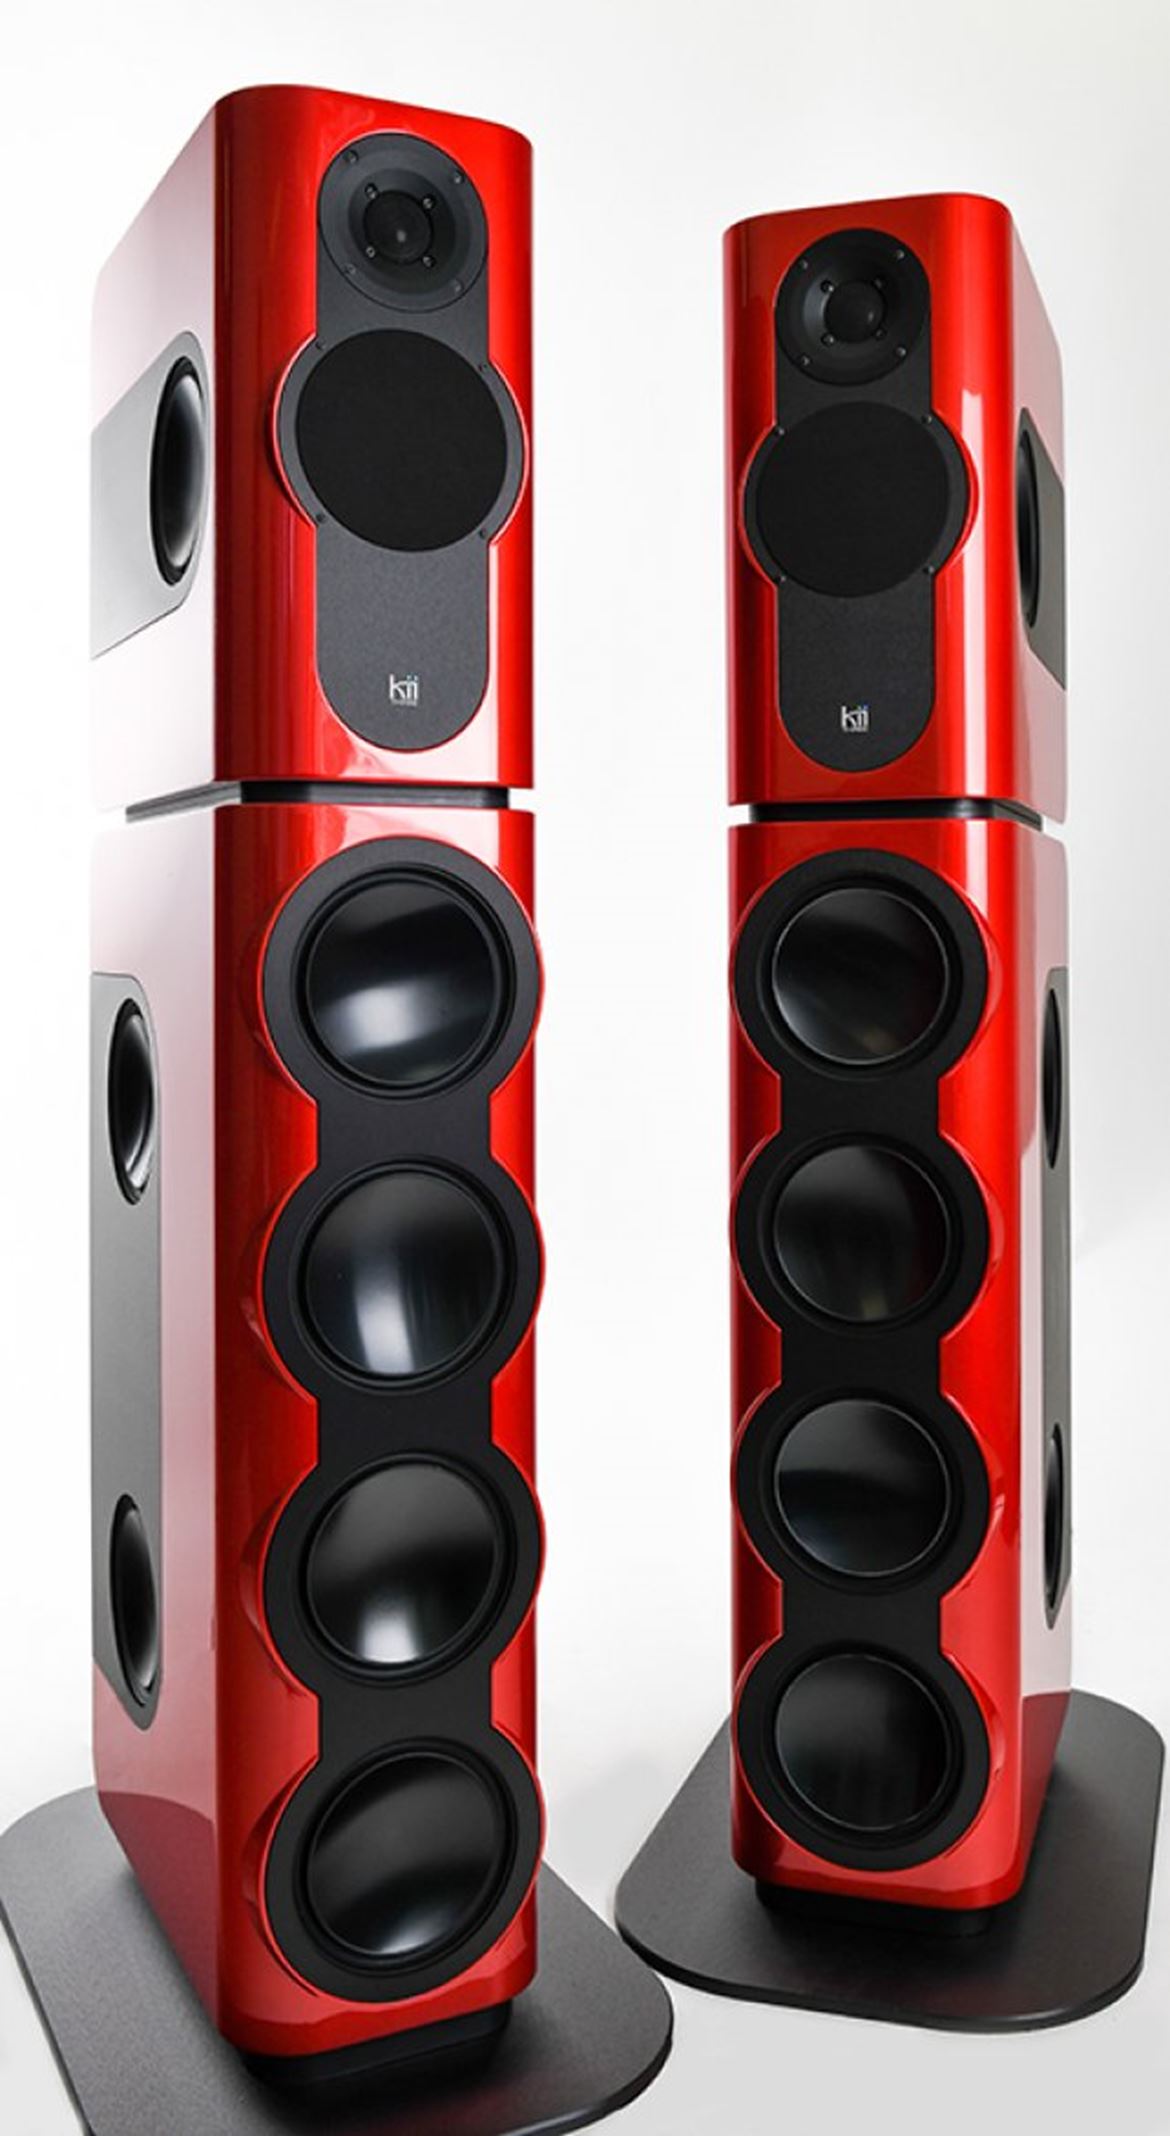 Upgrade your Kii THREEs Kii THREE BXT The BXT is an extension module which turns the Kii THREE into a veritable floor standing loudspeaker with 16 additional drivers and a total of 7000 Watts.  Kii THREE BXT System:  Floor standing DSP controlled High-End playback system. Consisting of: 2 x Kii THREE speakers in high gloss white, graphite matt metallic or any custom color of your choice  2 x BXT modules in the same or a contrasting color 1 x Kii Control offers volume control, input selection with touch switch operation, additional software menu, OLED display and is IR ready.  Inputs: USB, SPDIF, TOSLINK, AES, ANALOGUE All necessary cables are included